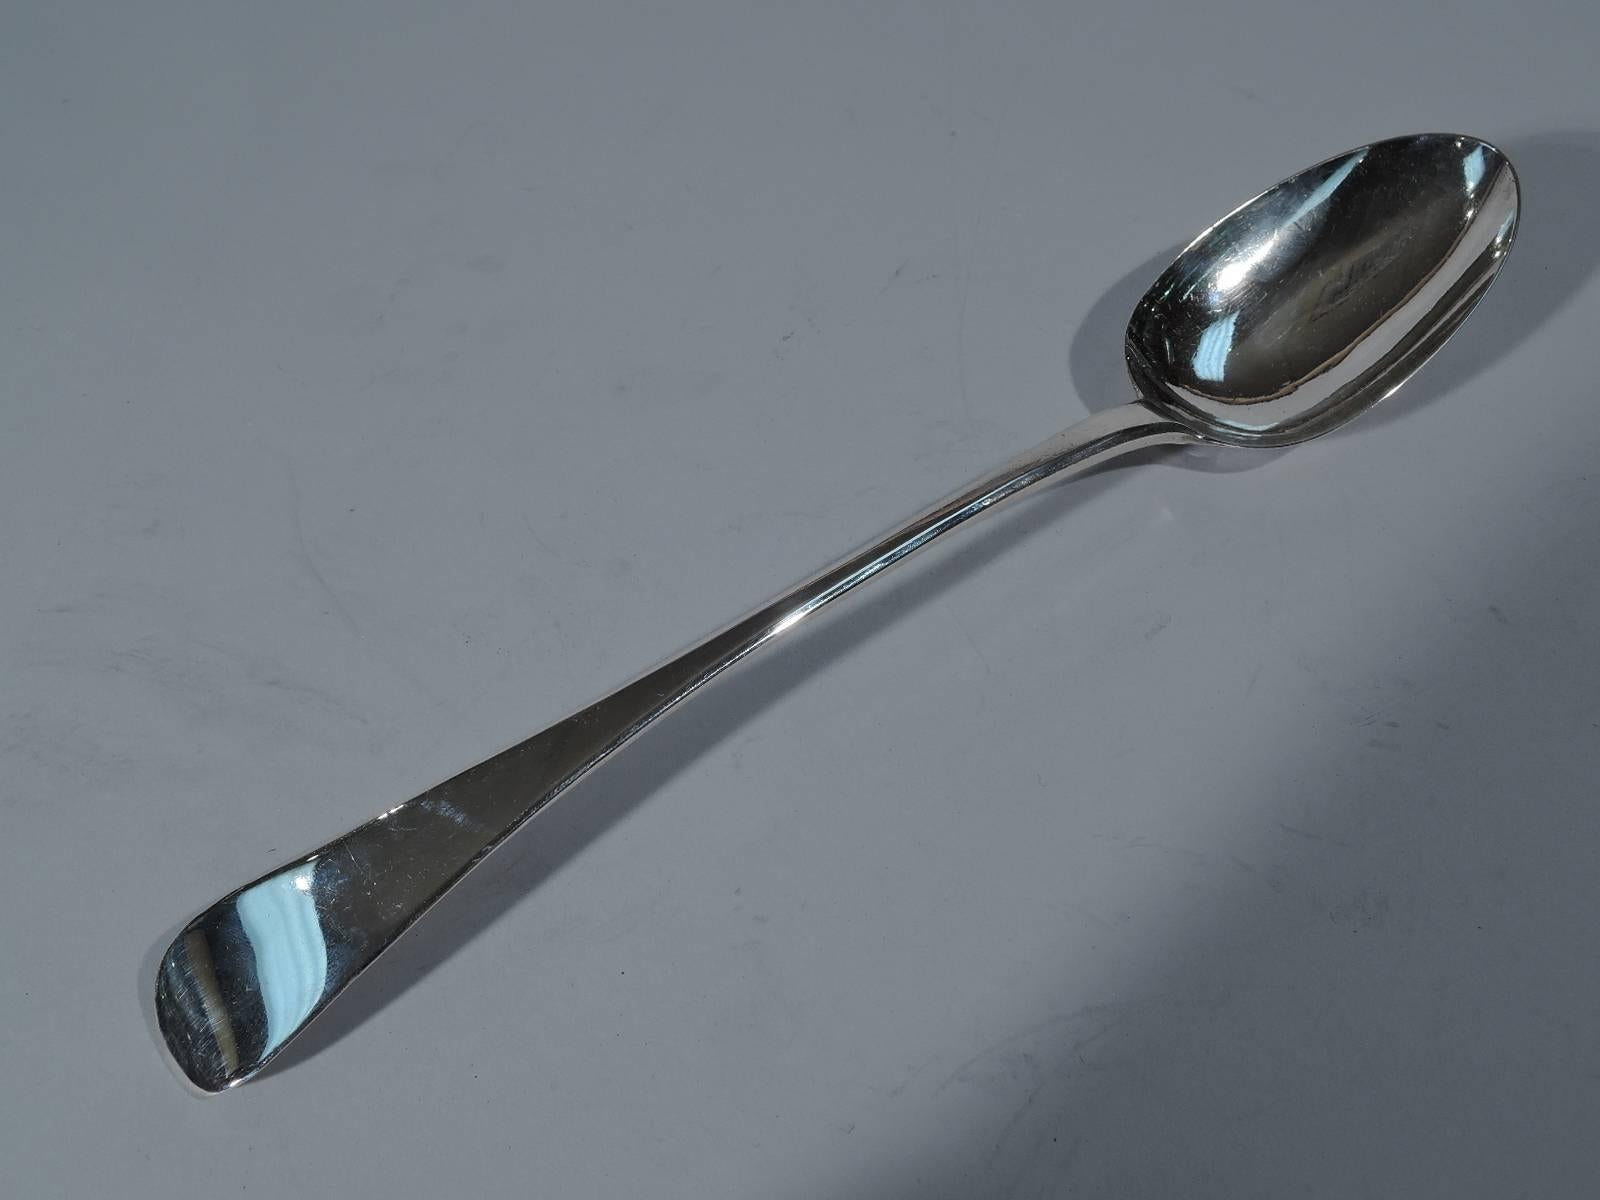 Regency sterling silver stuffing spoon. Made in London in 1824. Tapering handle and oval bowl. Indistinct maker’s mark – appears to be RR for Robert Rutland, a flatware maker in the early 19th century. Nice condition and patina.

Measures: Length: